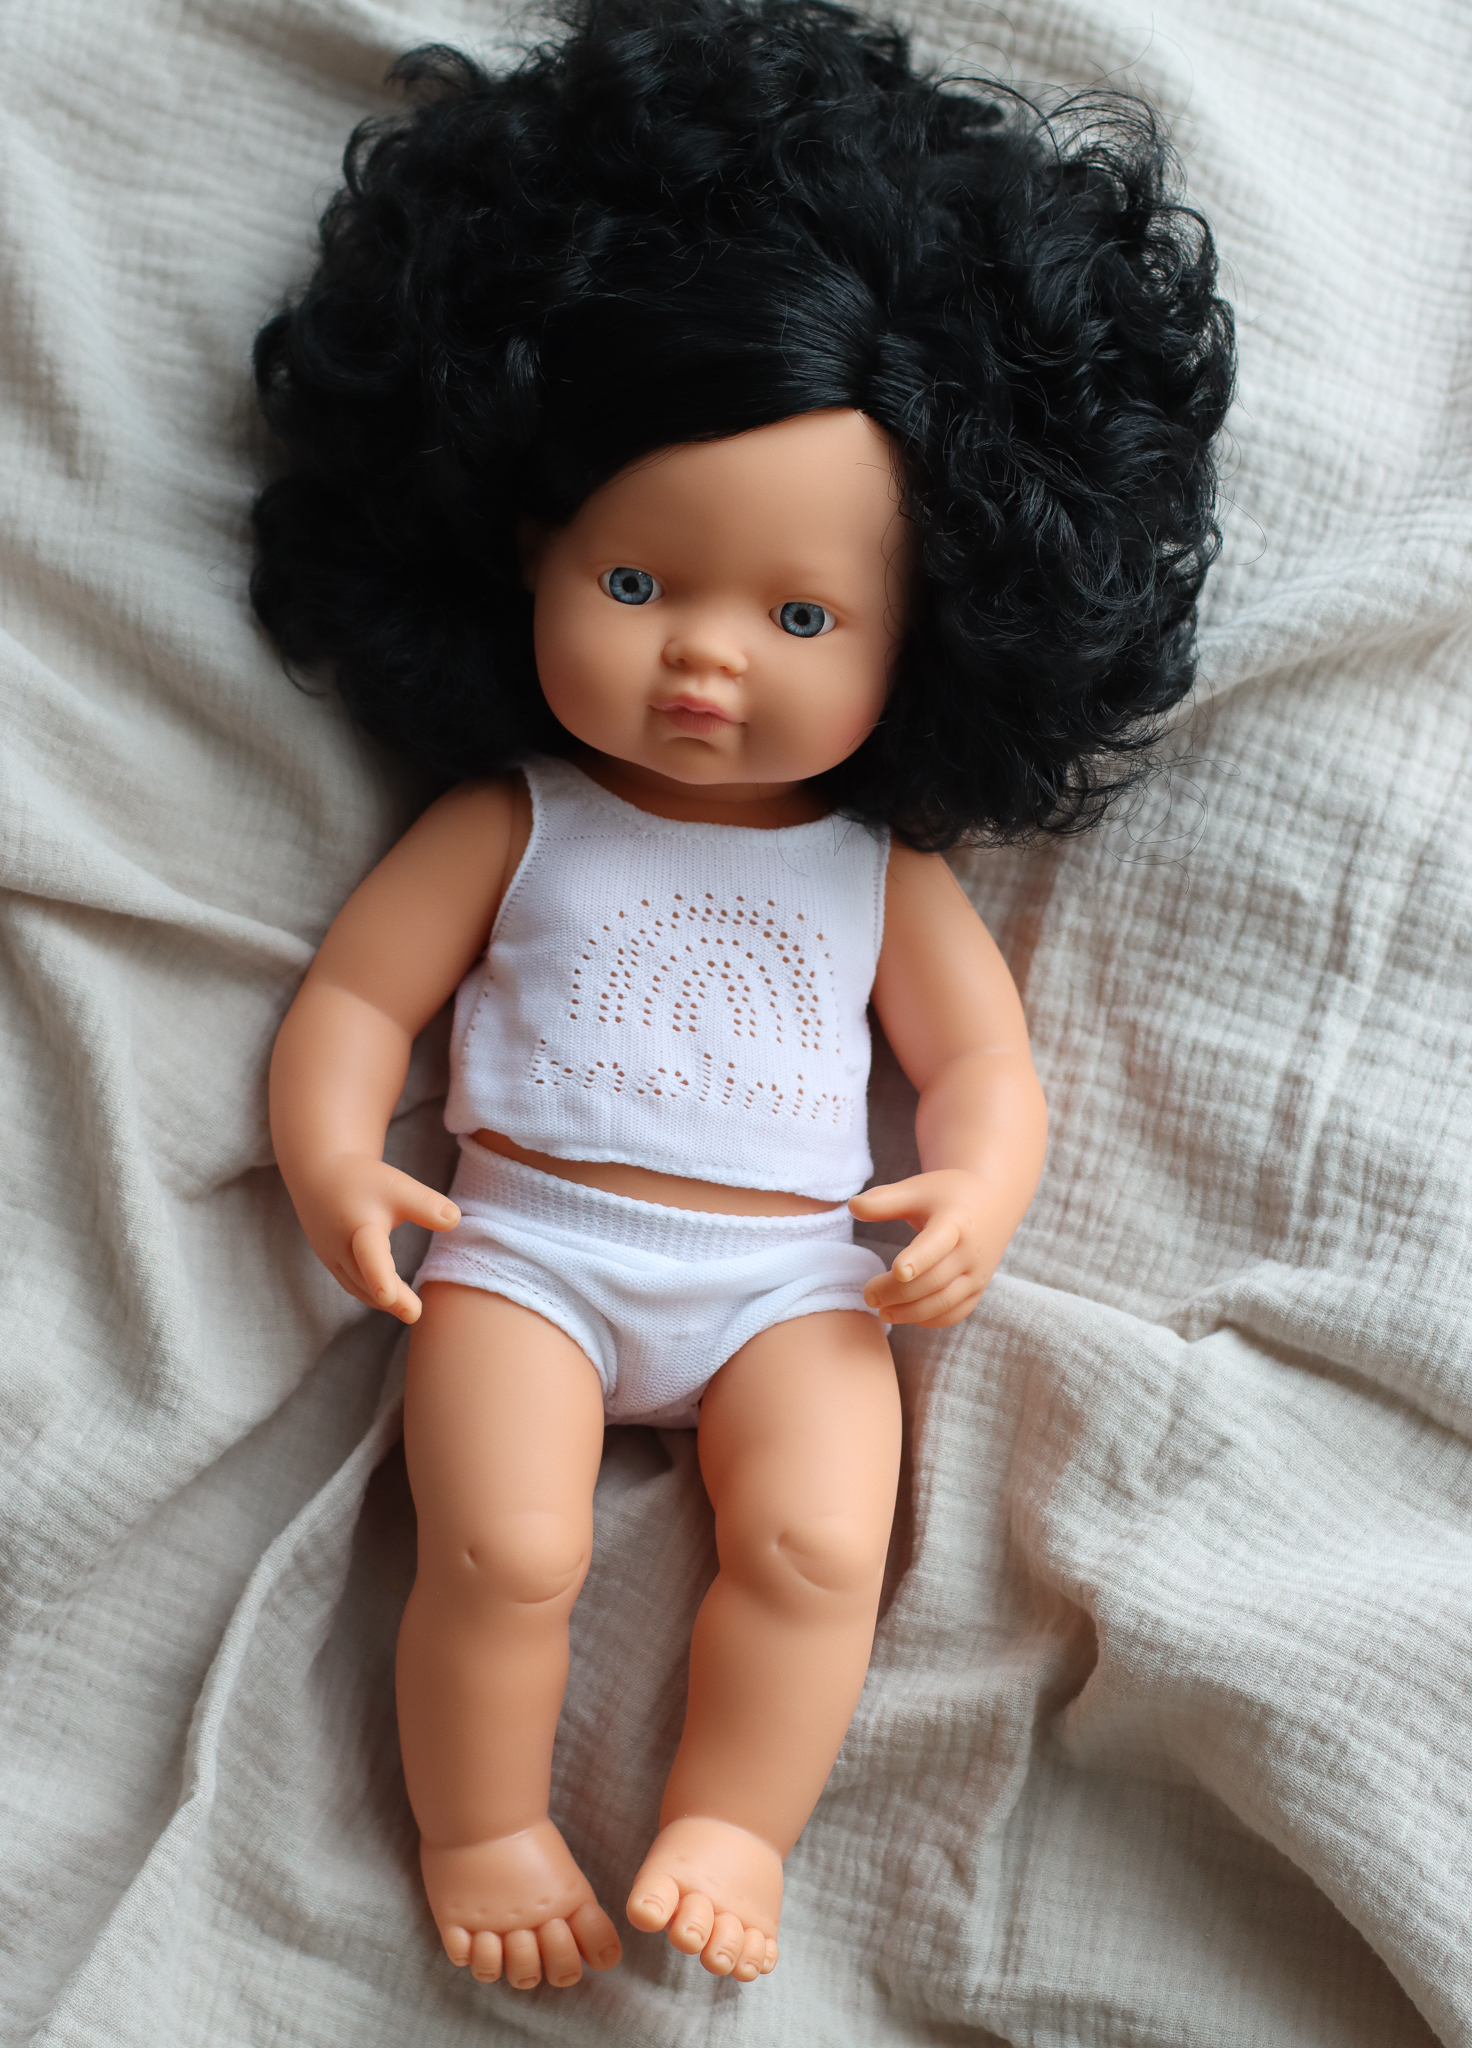 Baby doll caucasian girl with curly hair